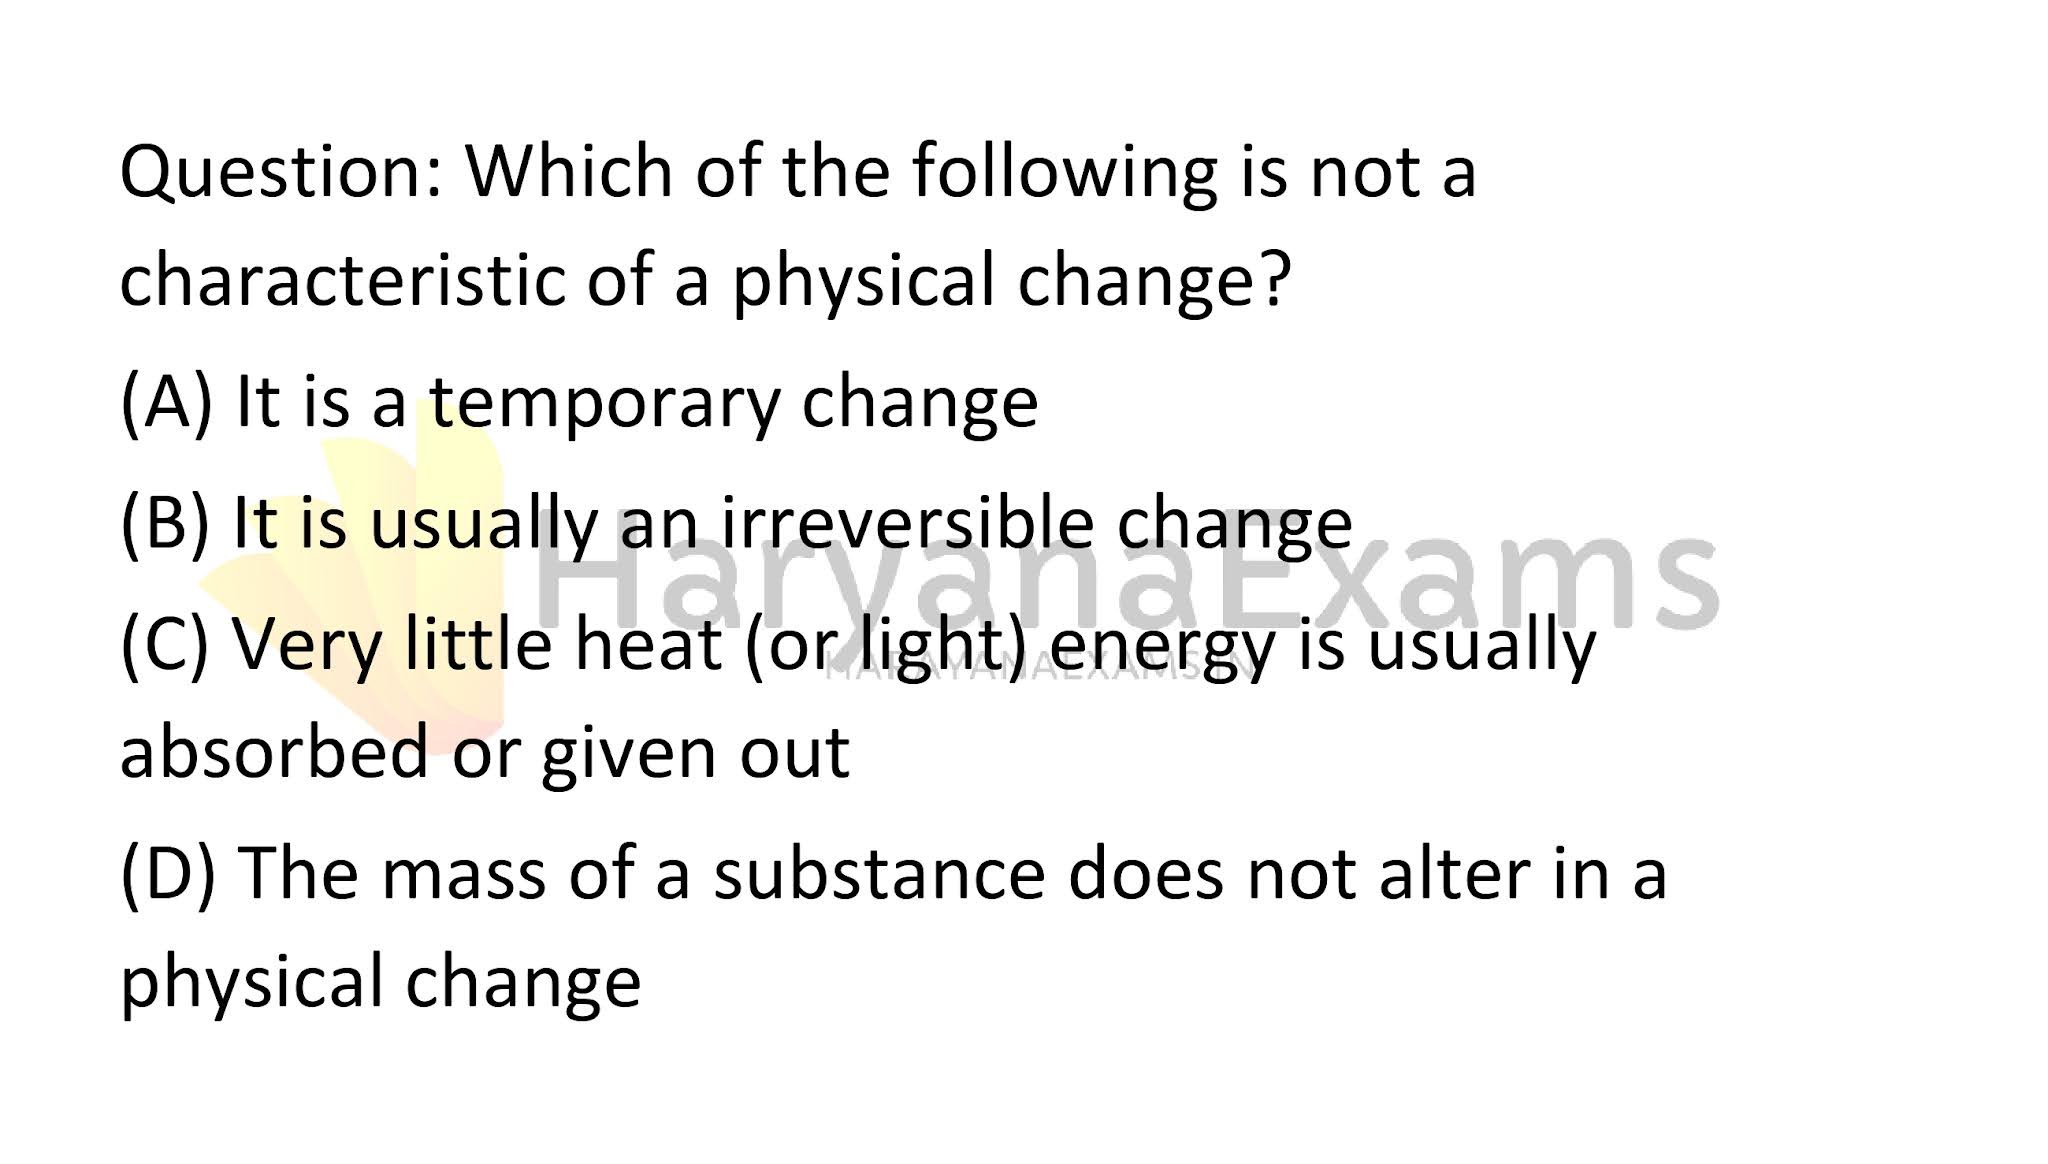 Which of the following is not a characteristic of a physical change?